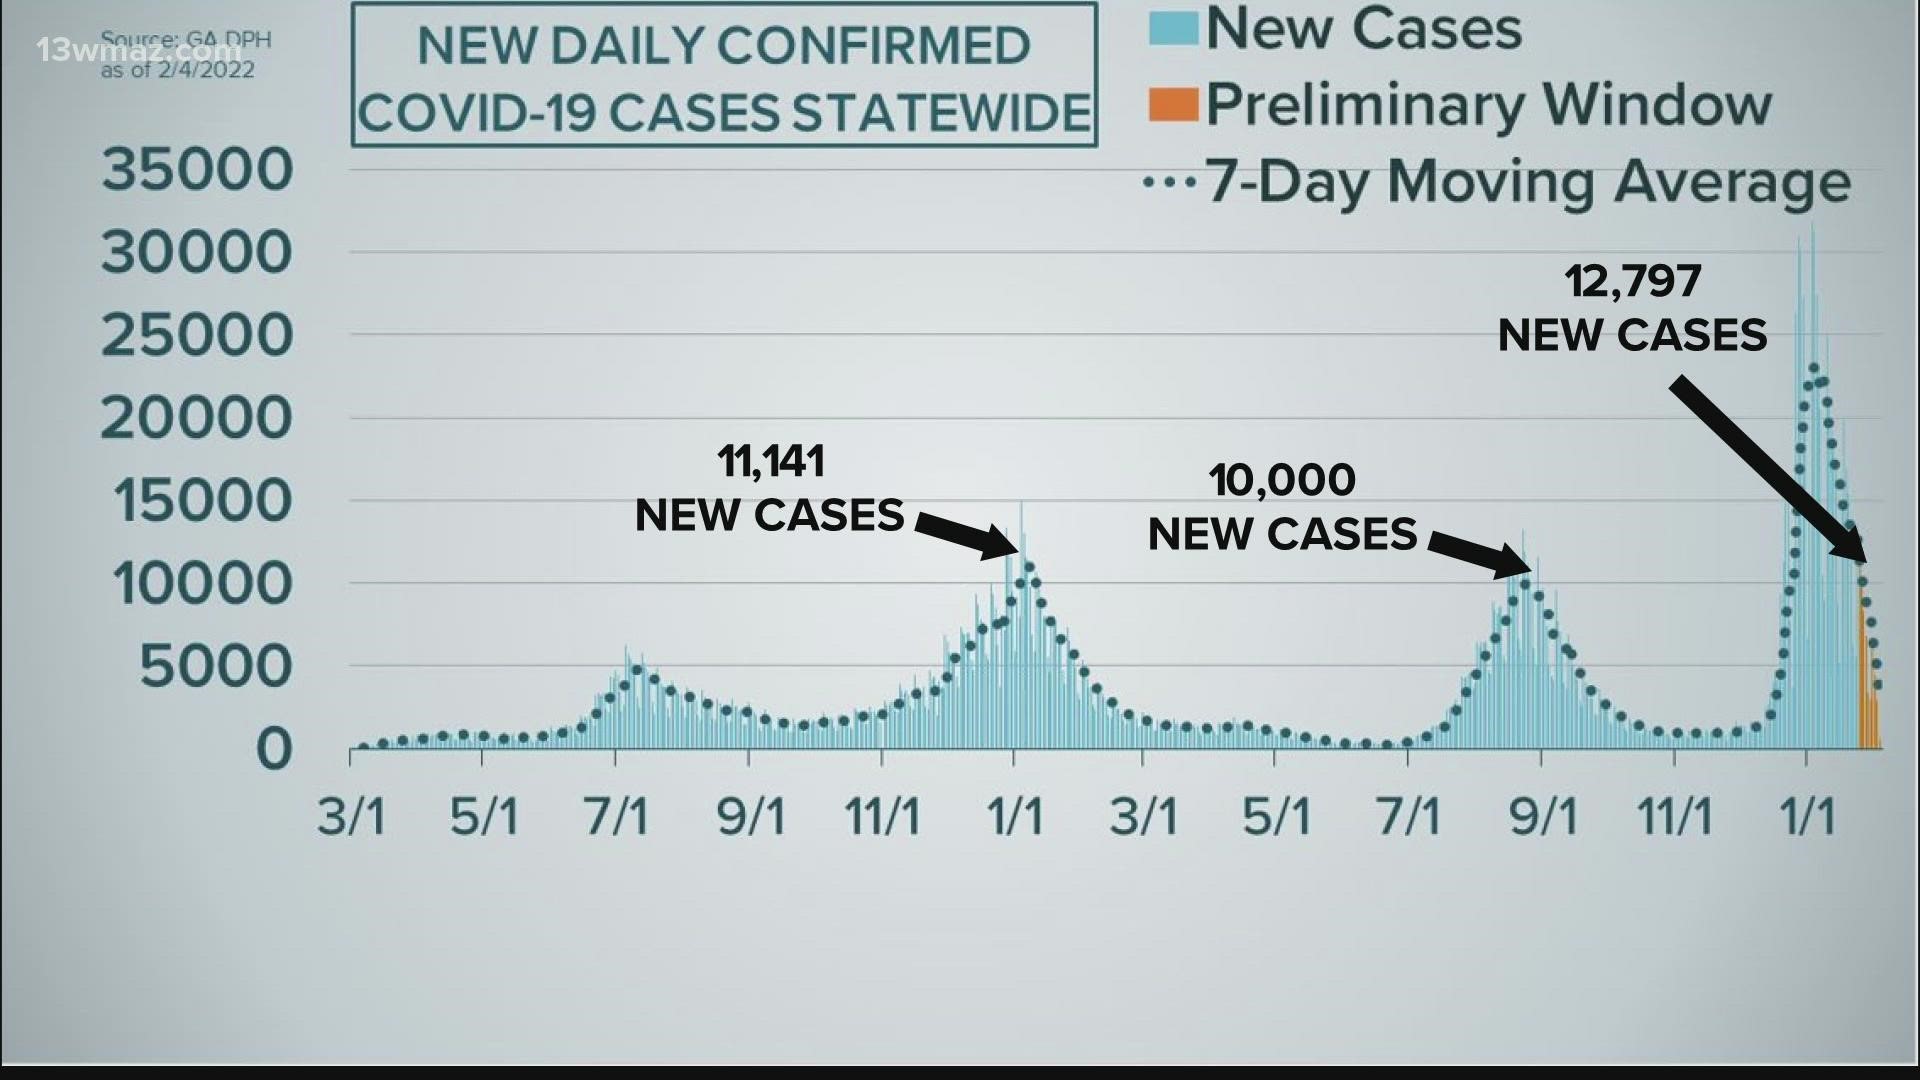 Georgia has almost cut its daily new case count in half from the peak in January.